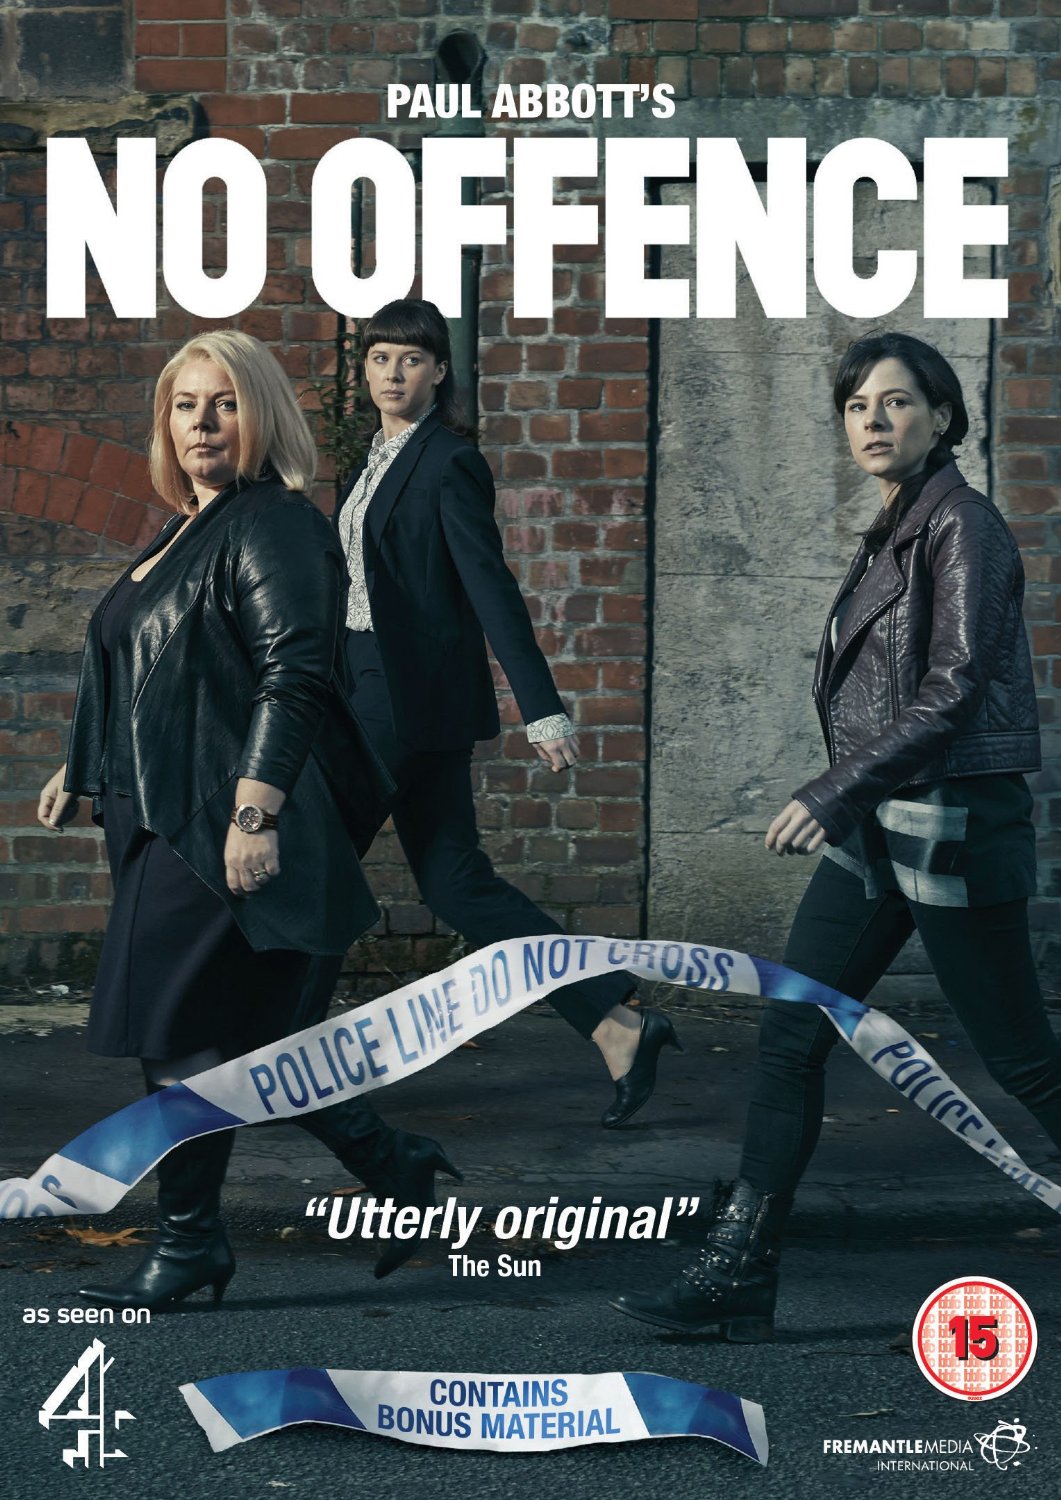 Watch No Offence - Season 2 online in high quality for free on Tornado Movies!